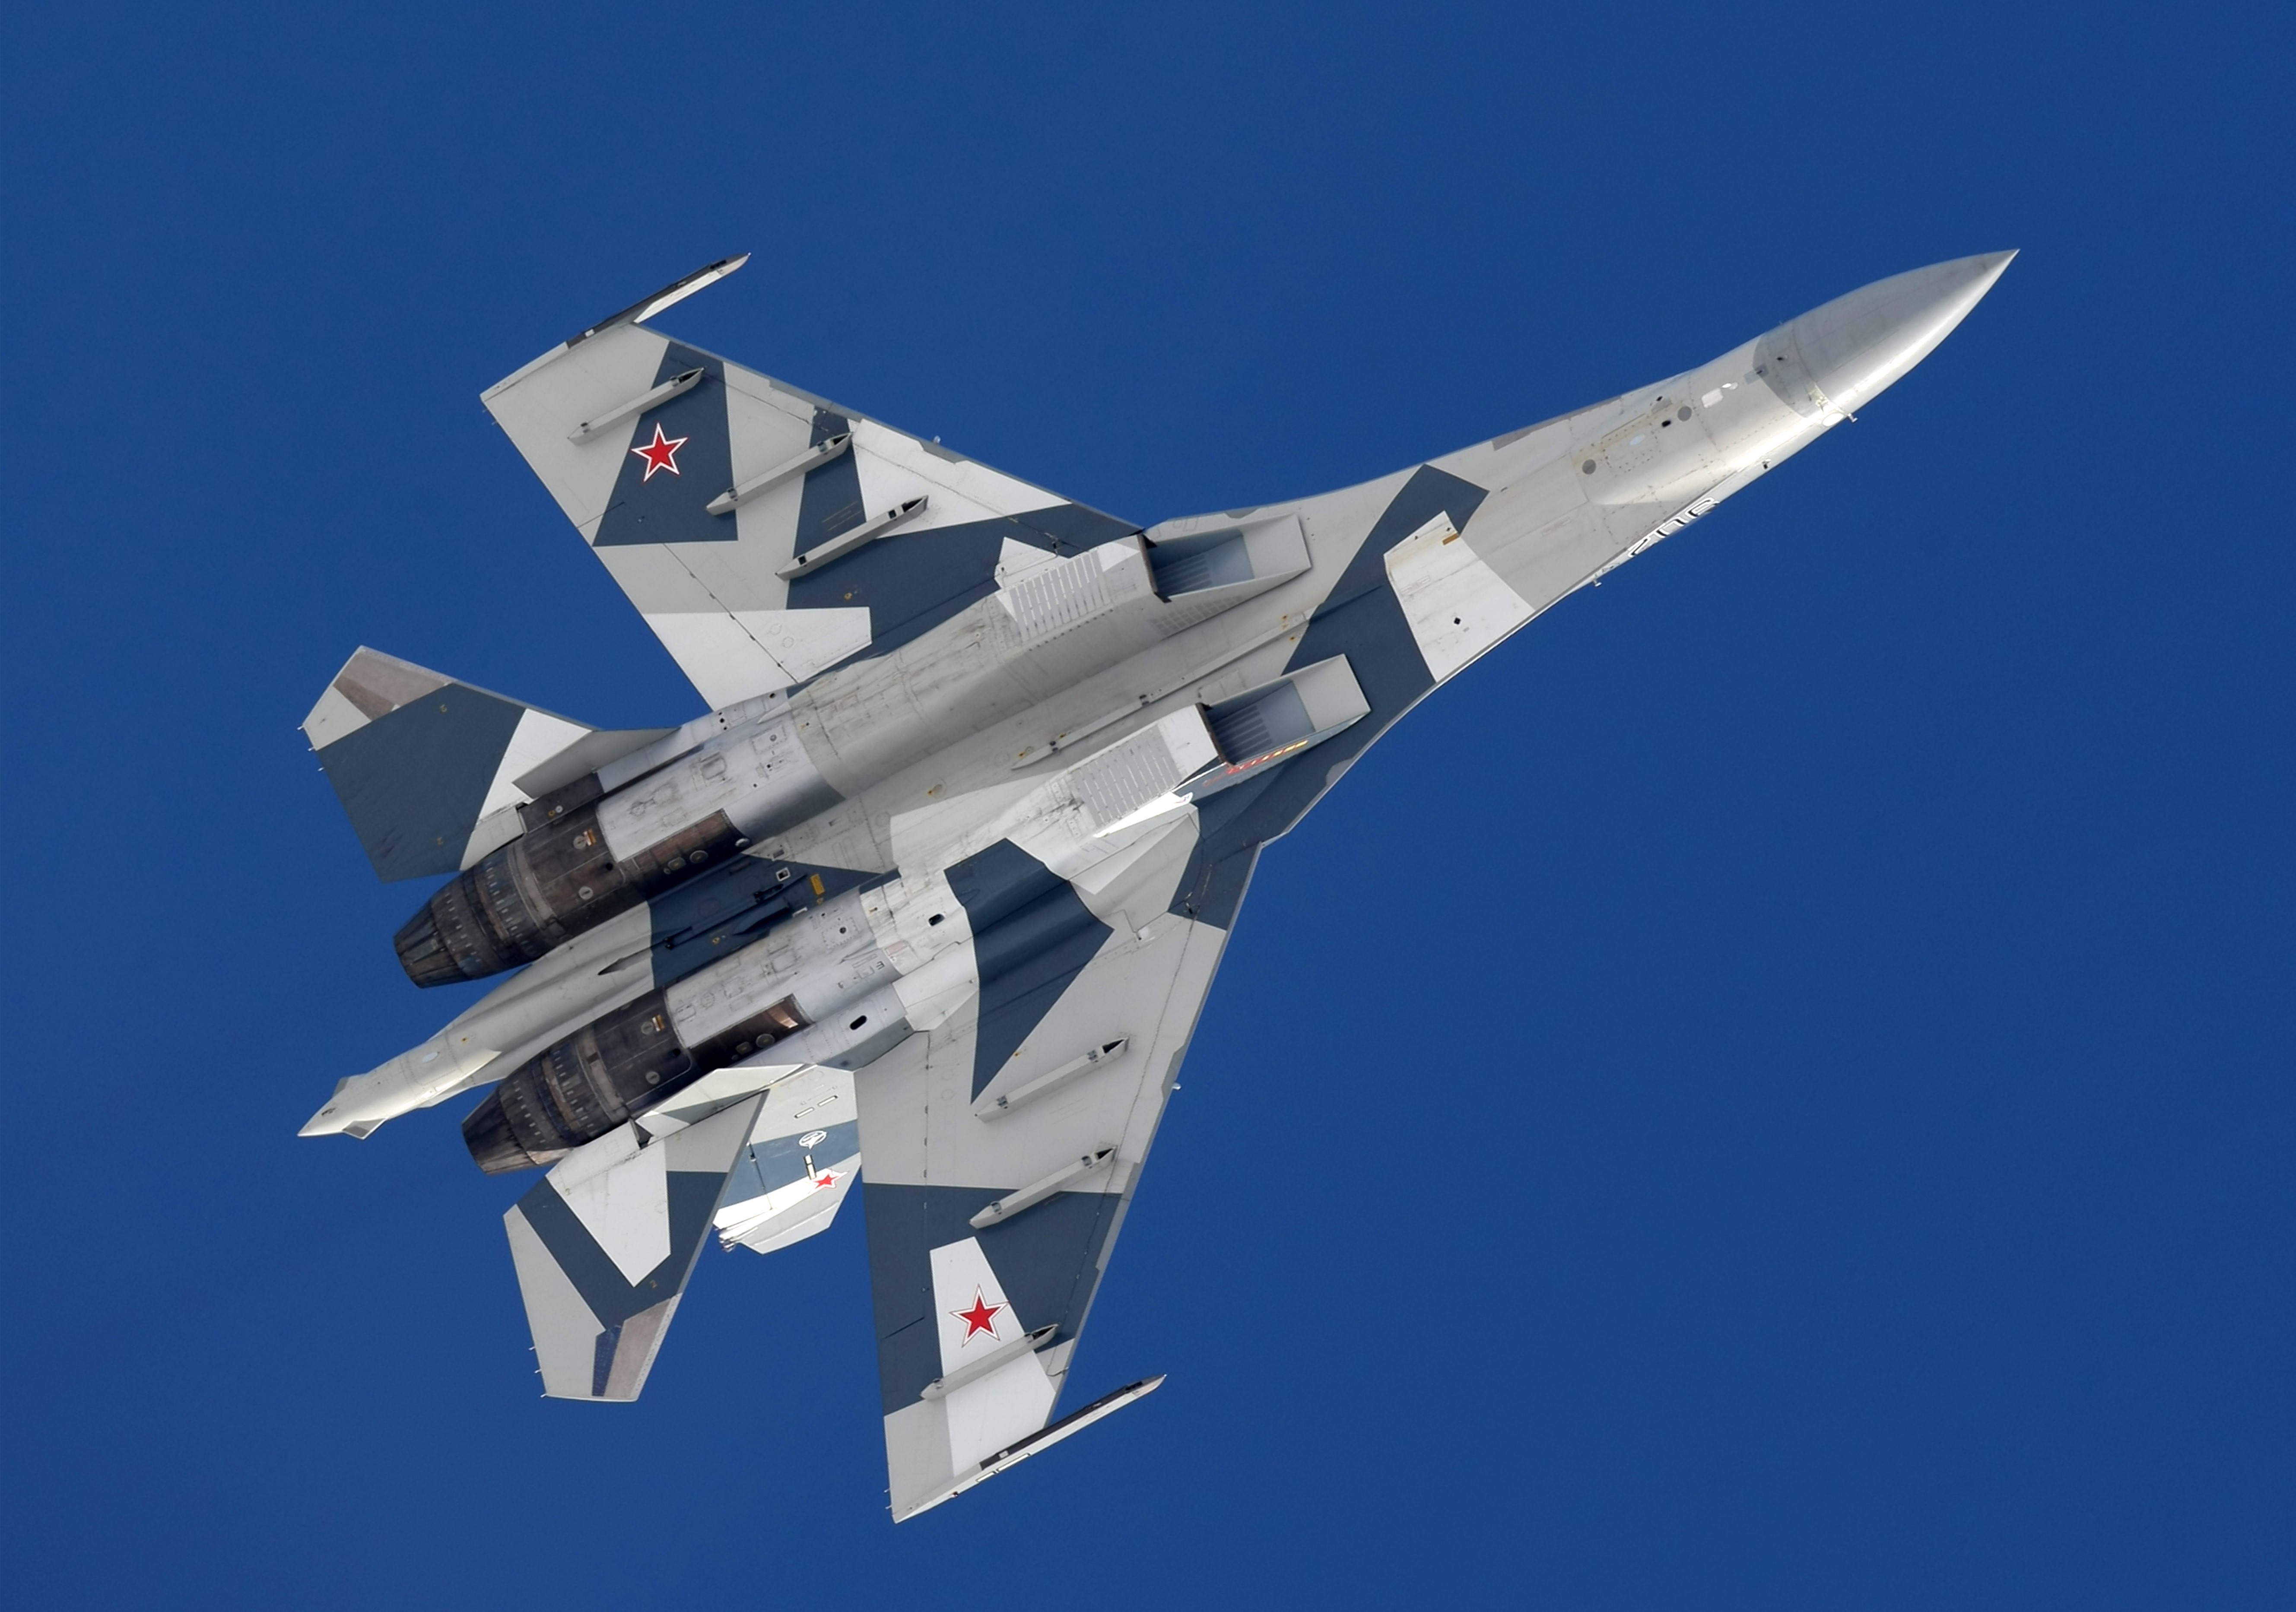 military, sukhoi su 35, air force, aircraft, jet fighter, warplane, jet fighters